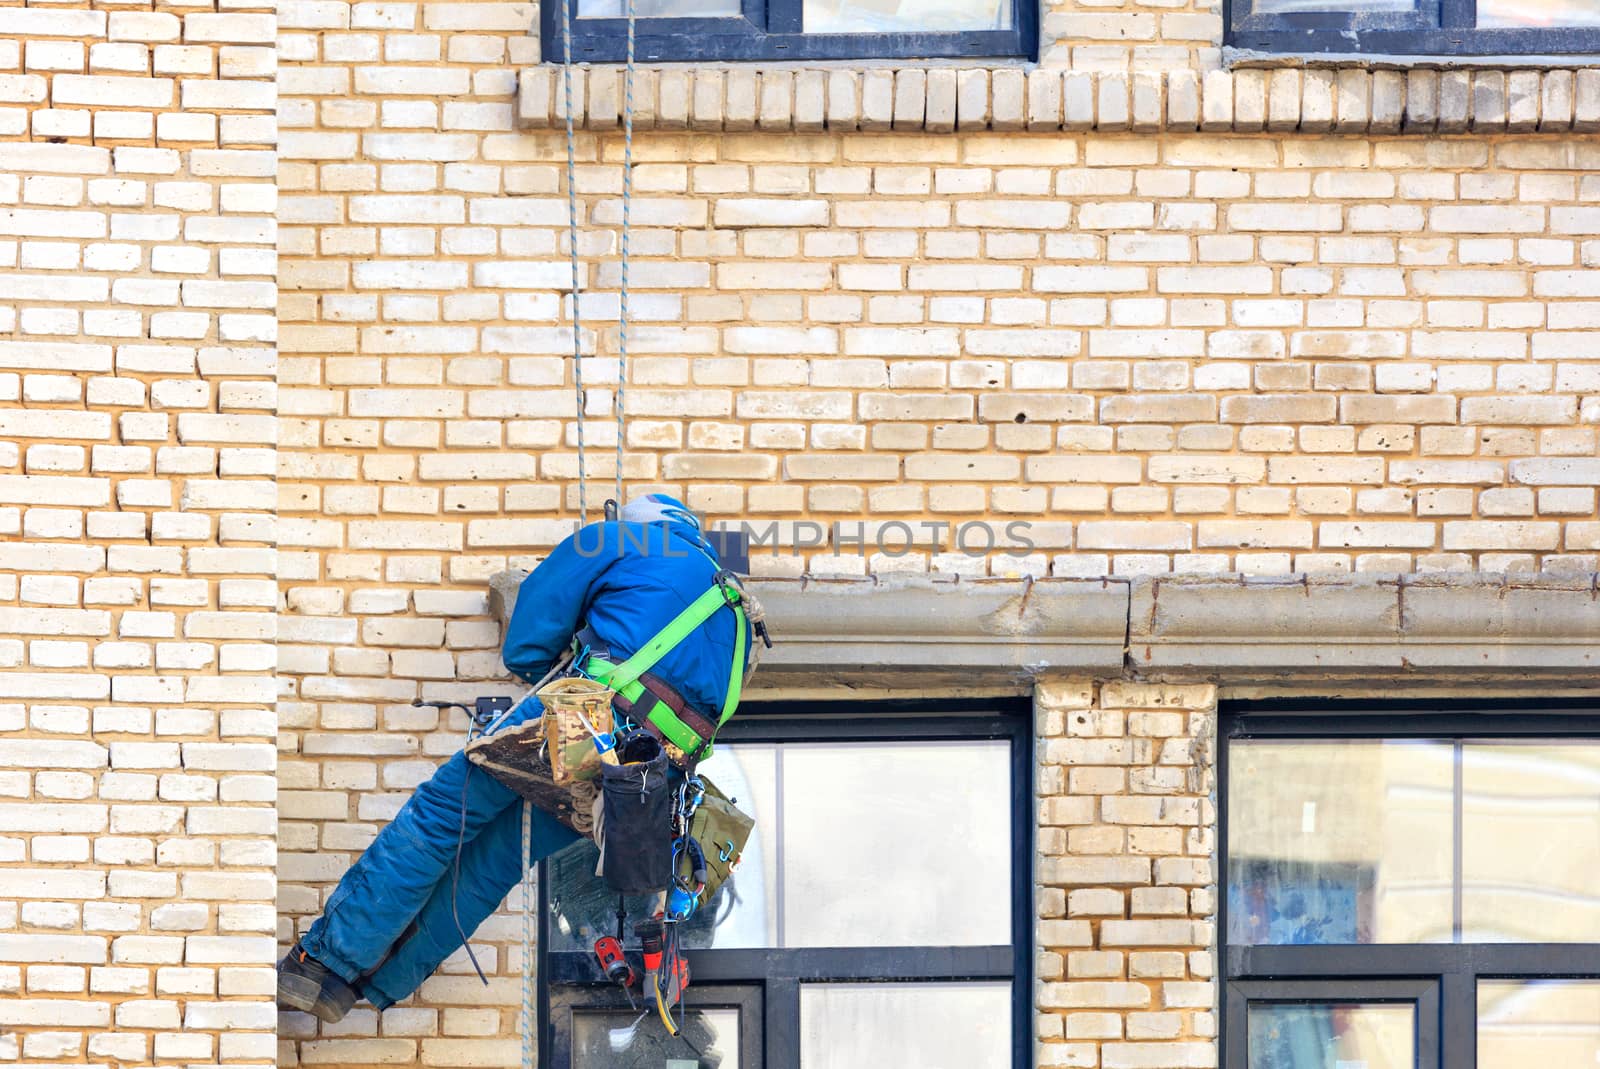 The builder of an industrial climber hangs on safety ropes on the brick wall of an old building with a set of various tools behind his back and repairs window frames, image with copy space.